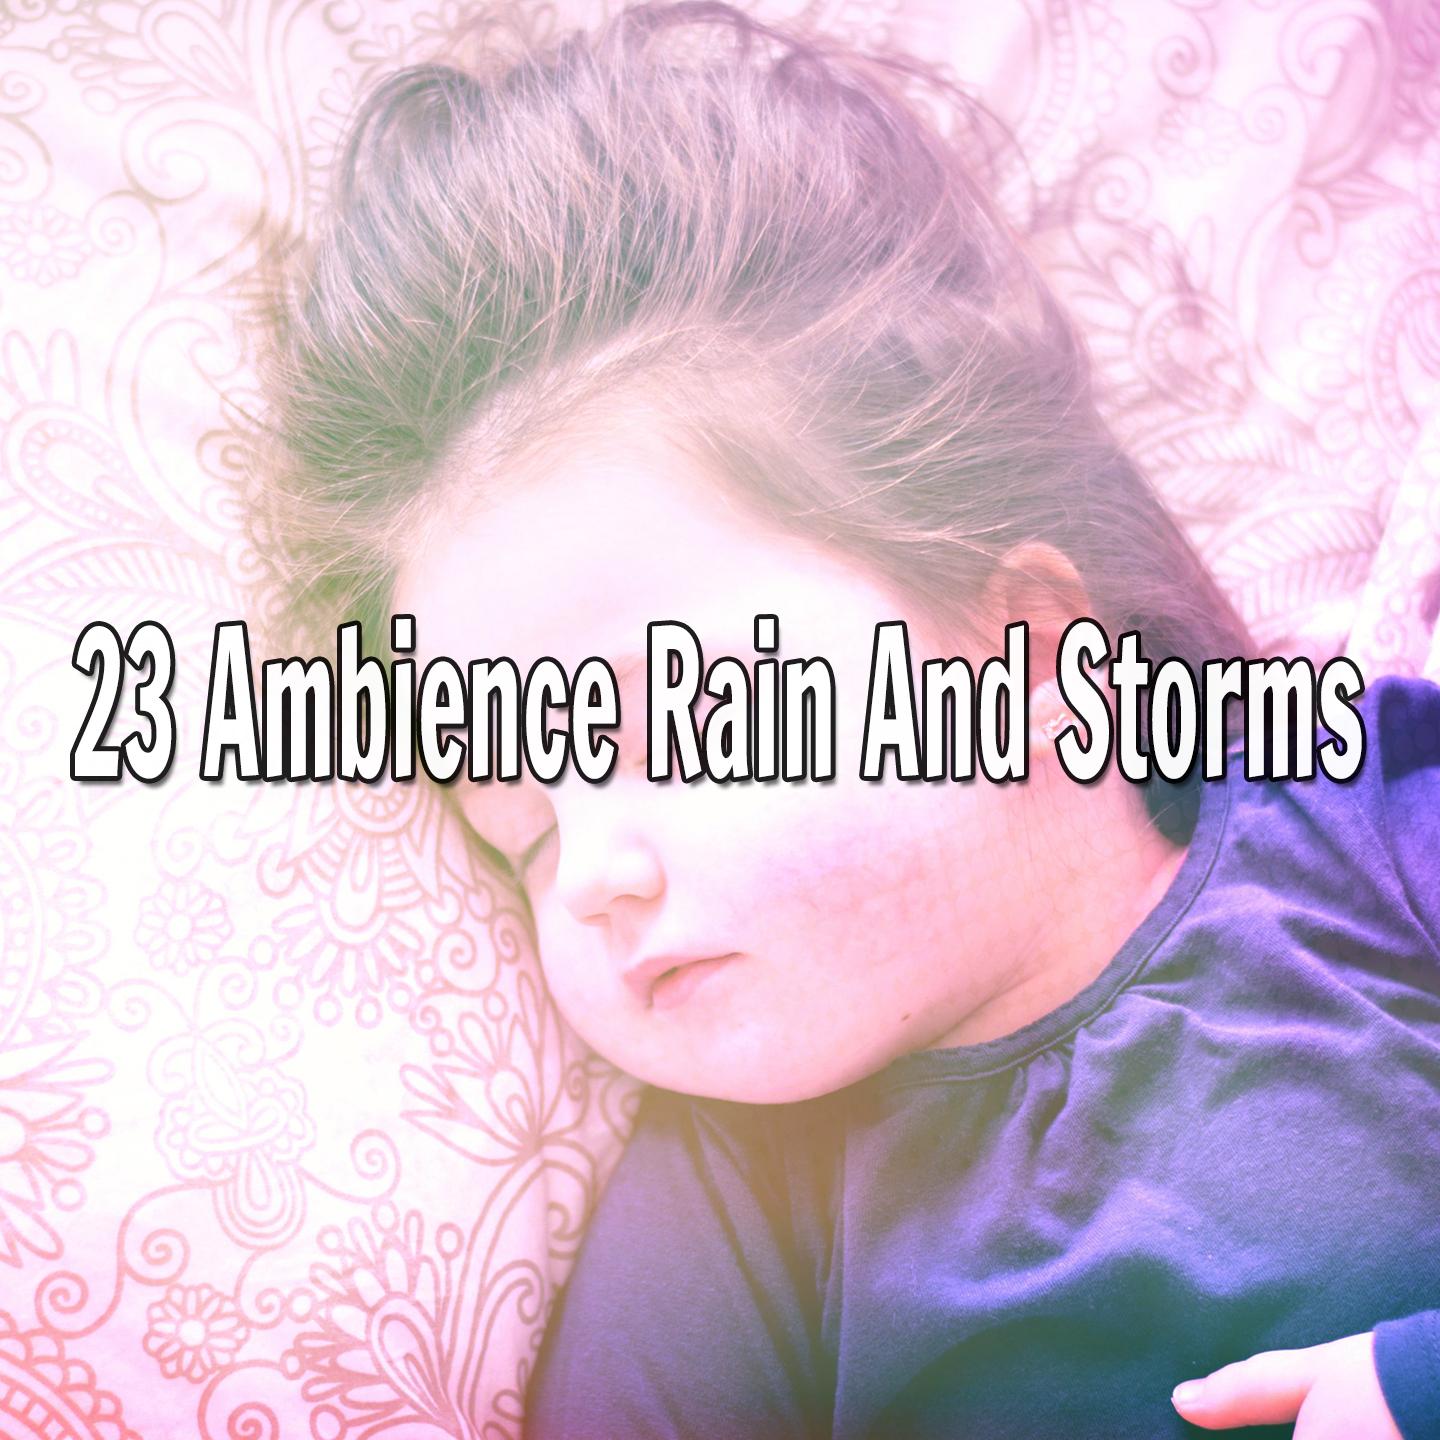 23 Ambience Rain and Storms